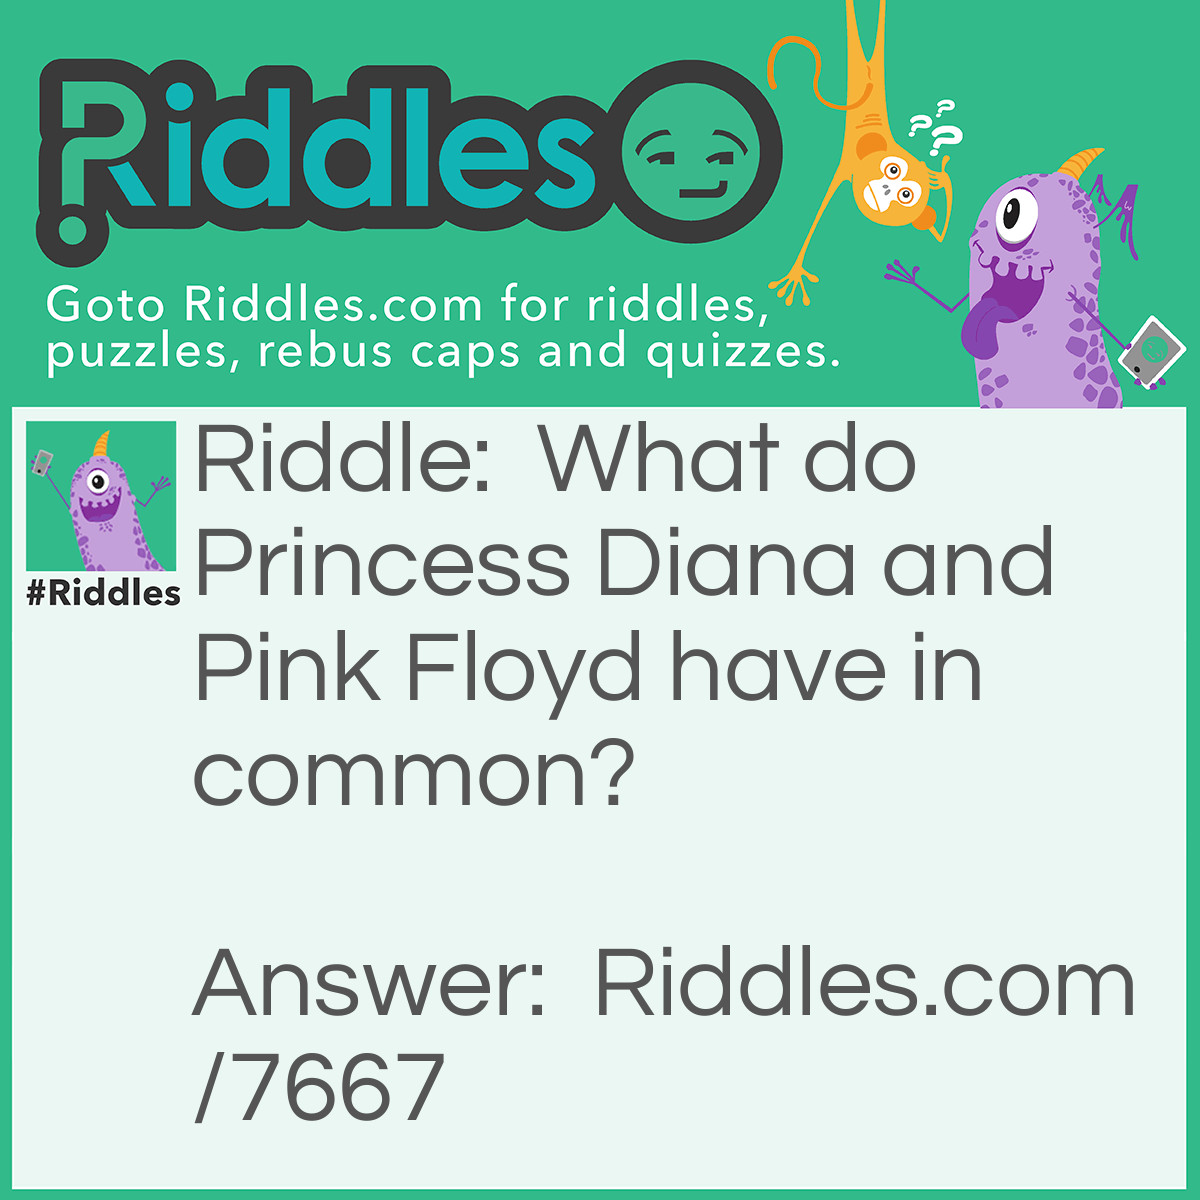 Riddle: What do Princess Diana and Pink Floyd have in common? Answer: Their last big hit was the wall.